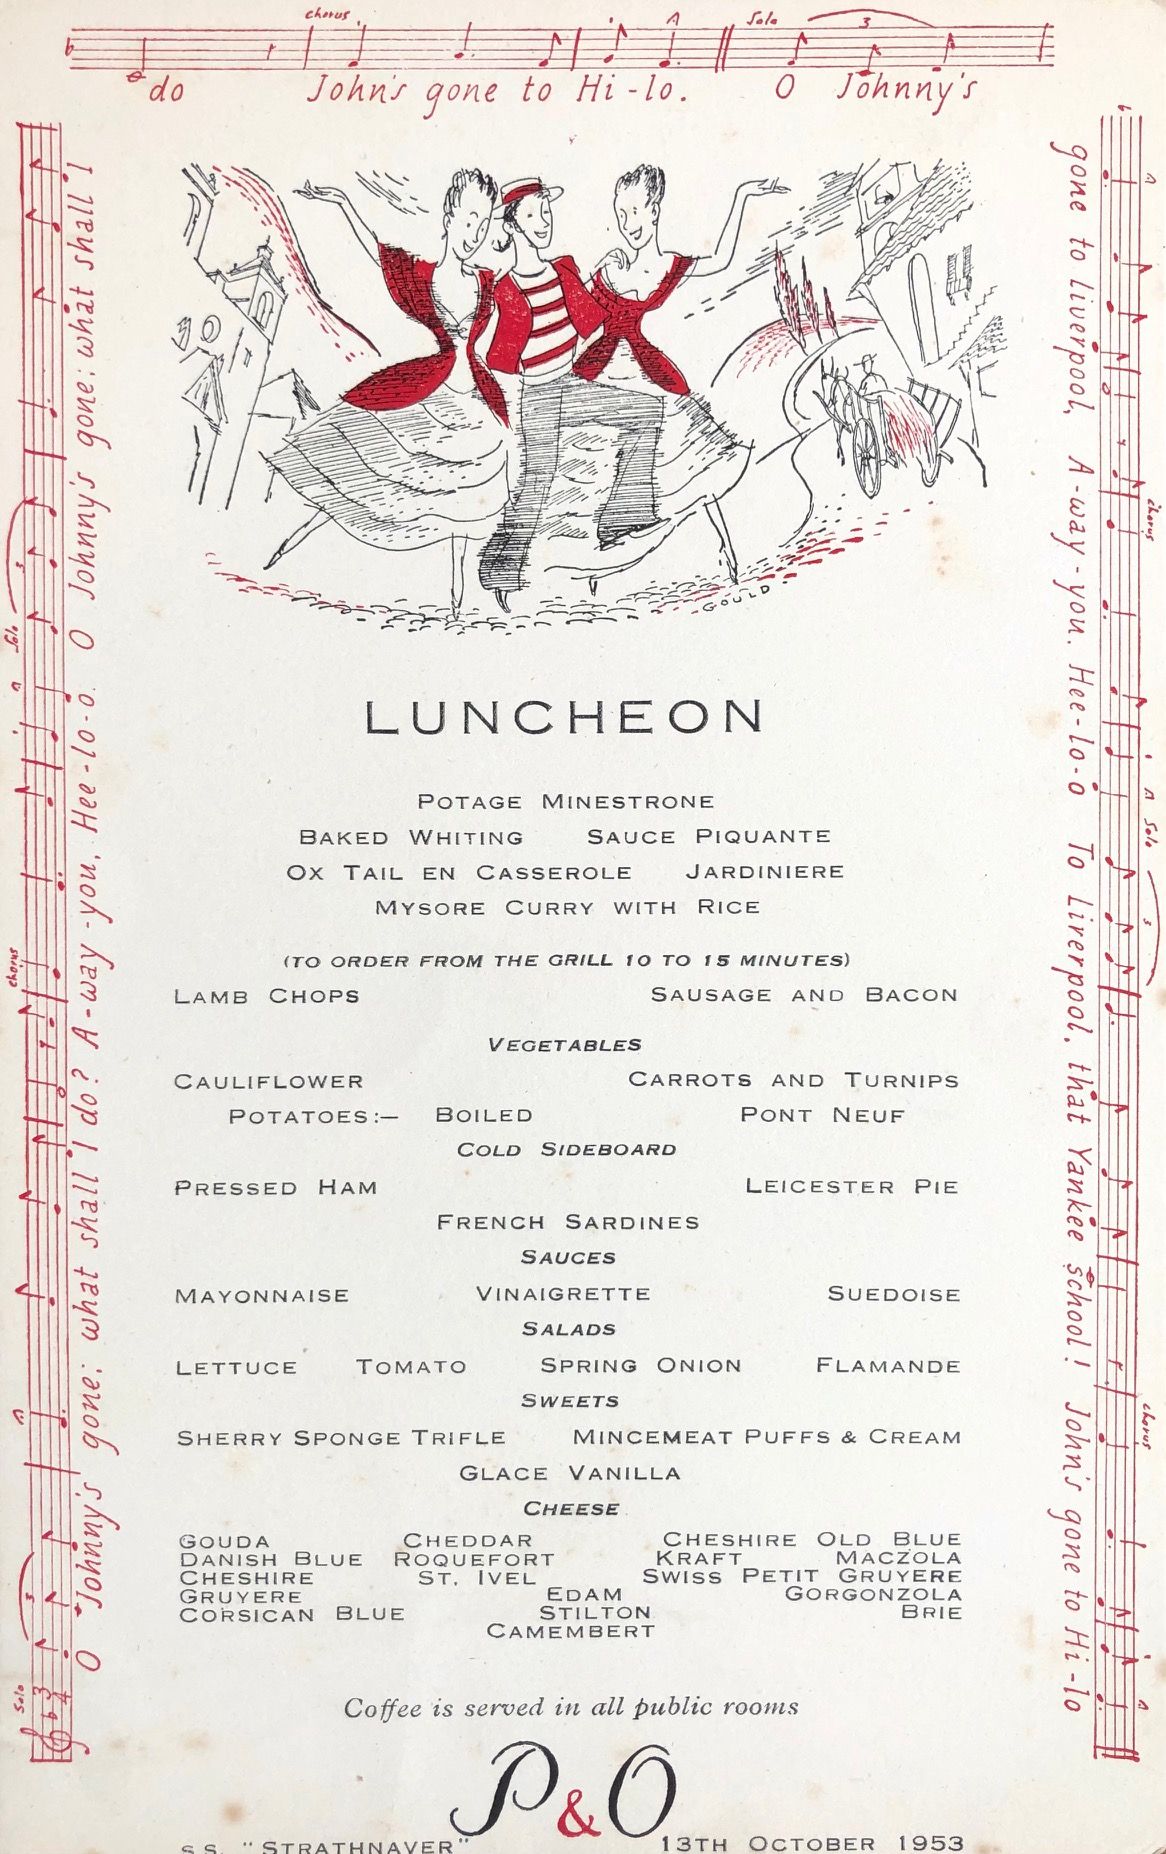 *NEW* P & O Lines. S.S. "Strathnaver" Luncheon Menu - Johnny's Gone to Hilo